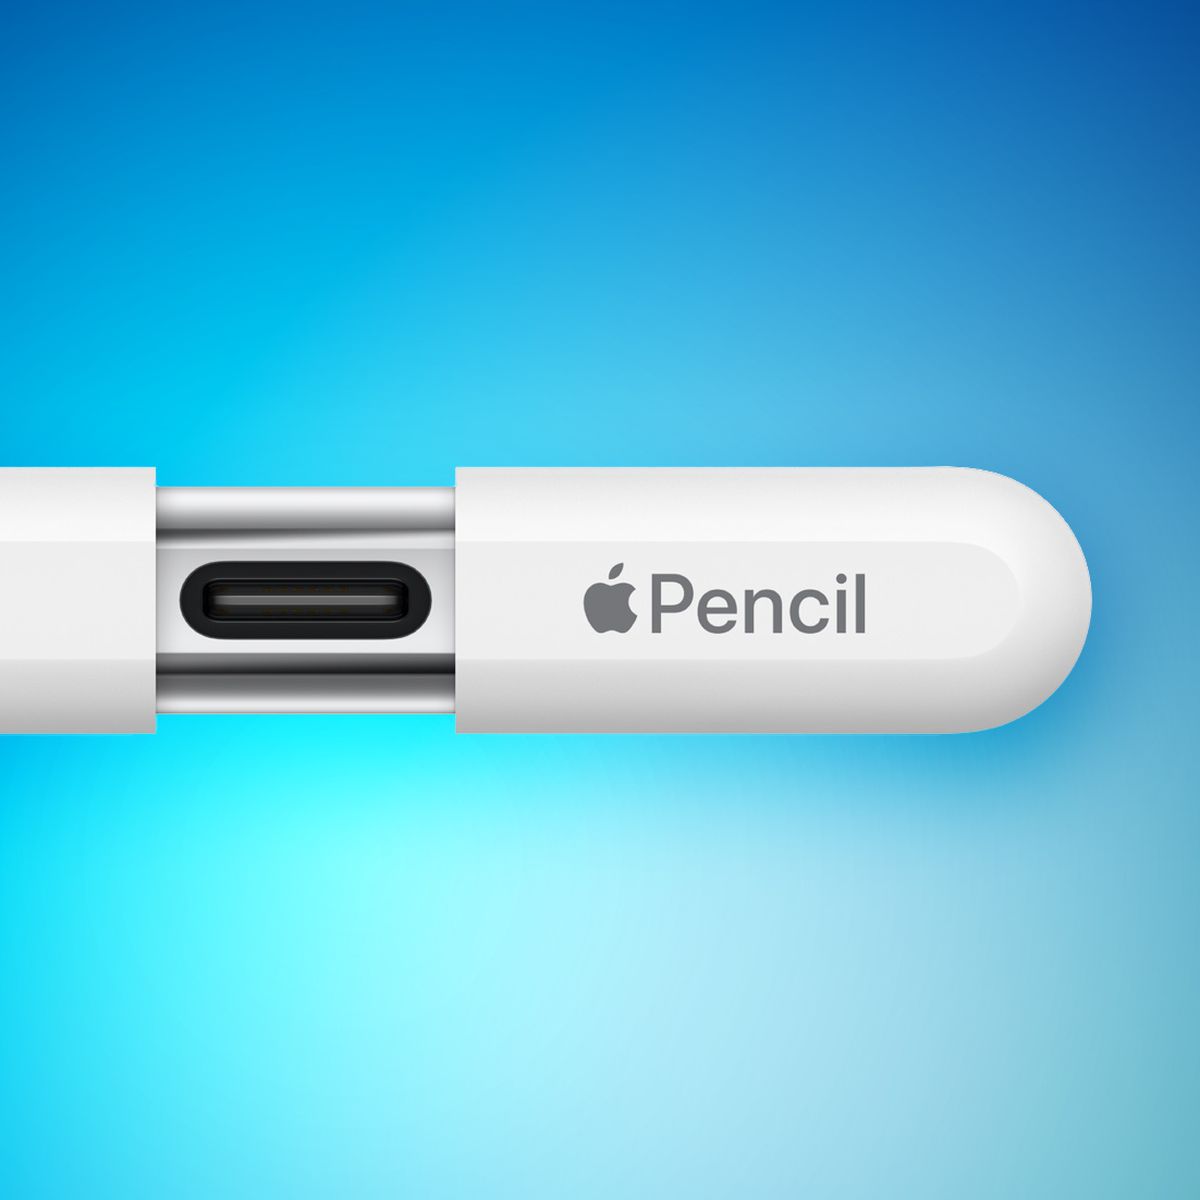 New Apple Pencil (USB-C) - Unboxing & Hands-On! 